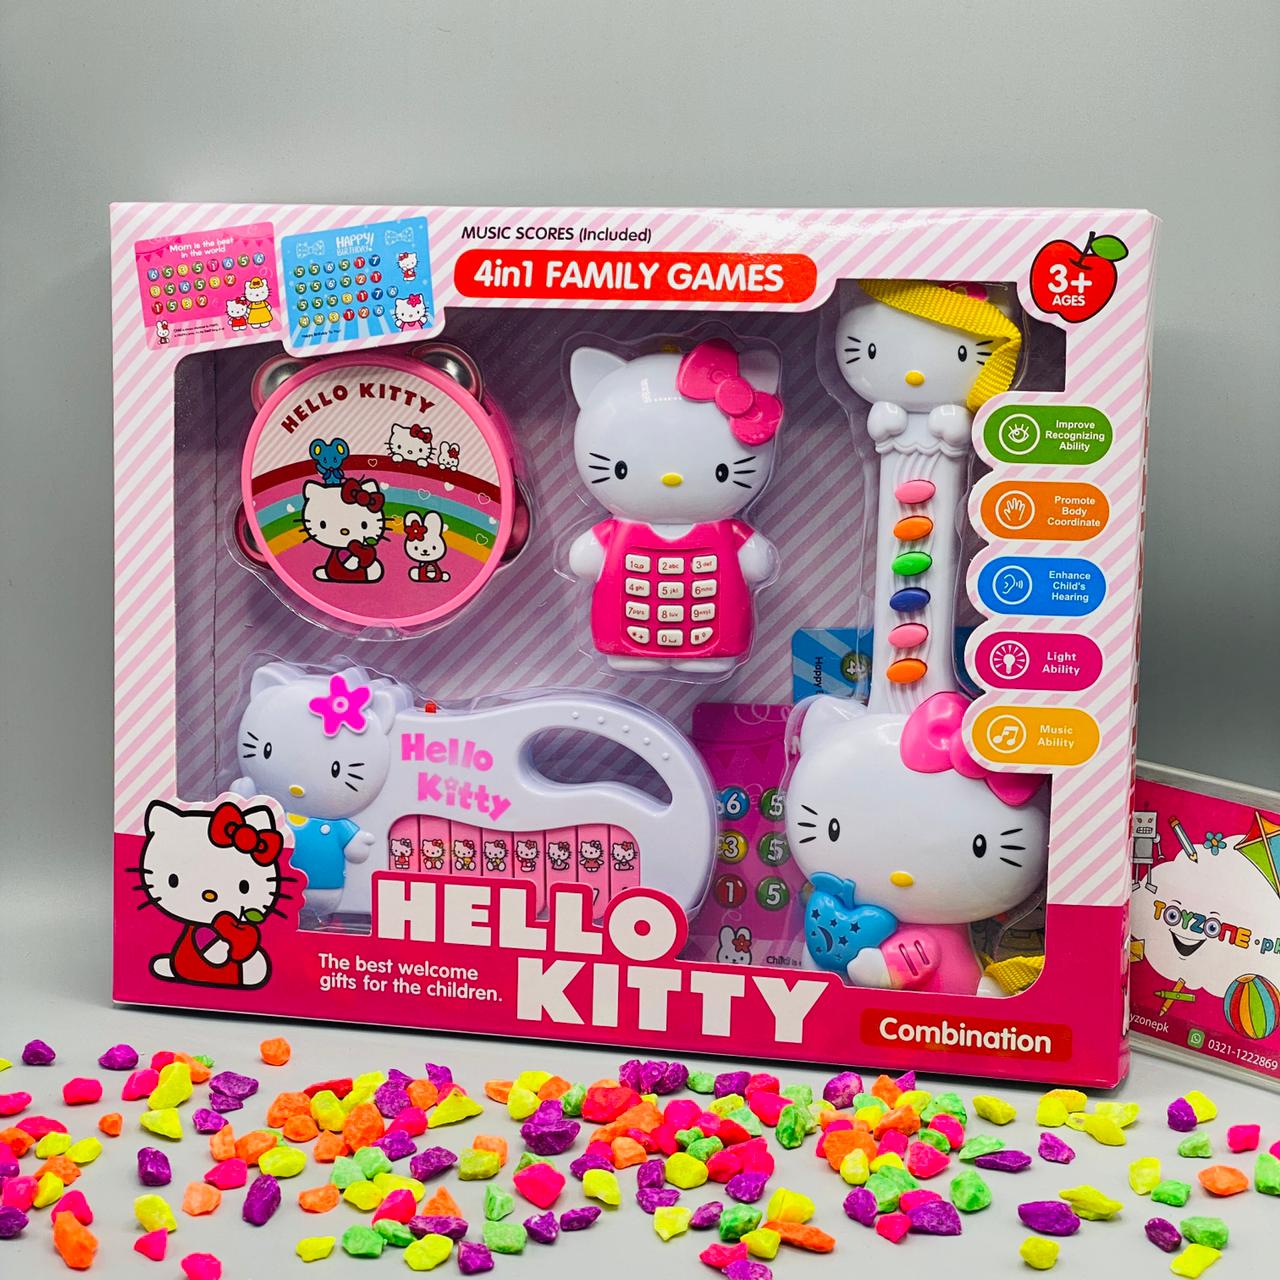 hello kitty music 4 in 1 family games tzp1